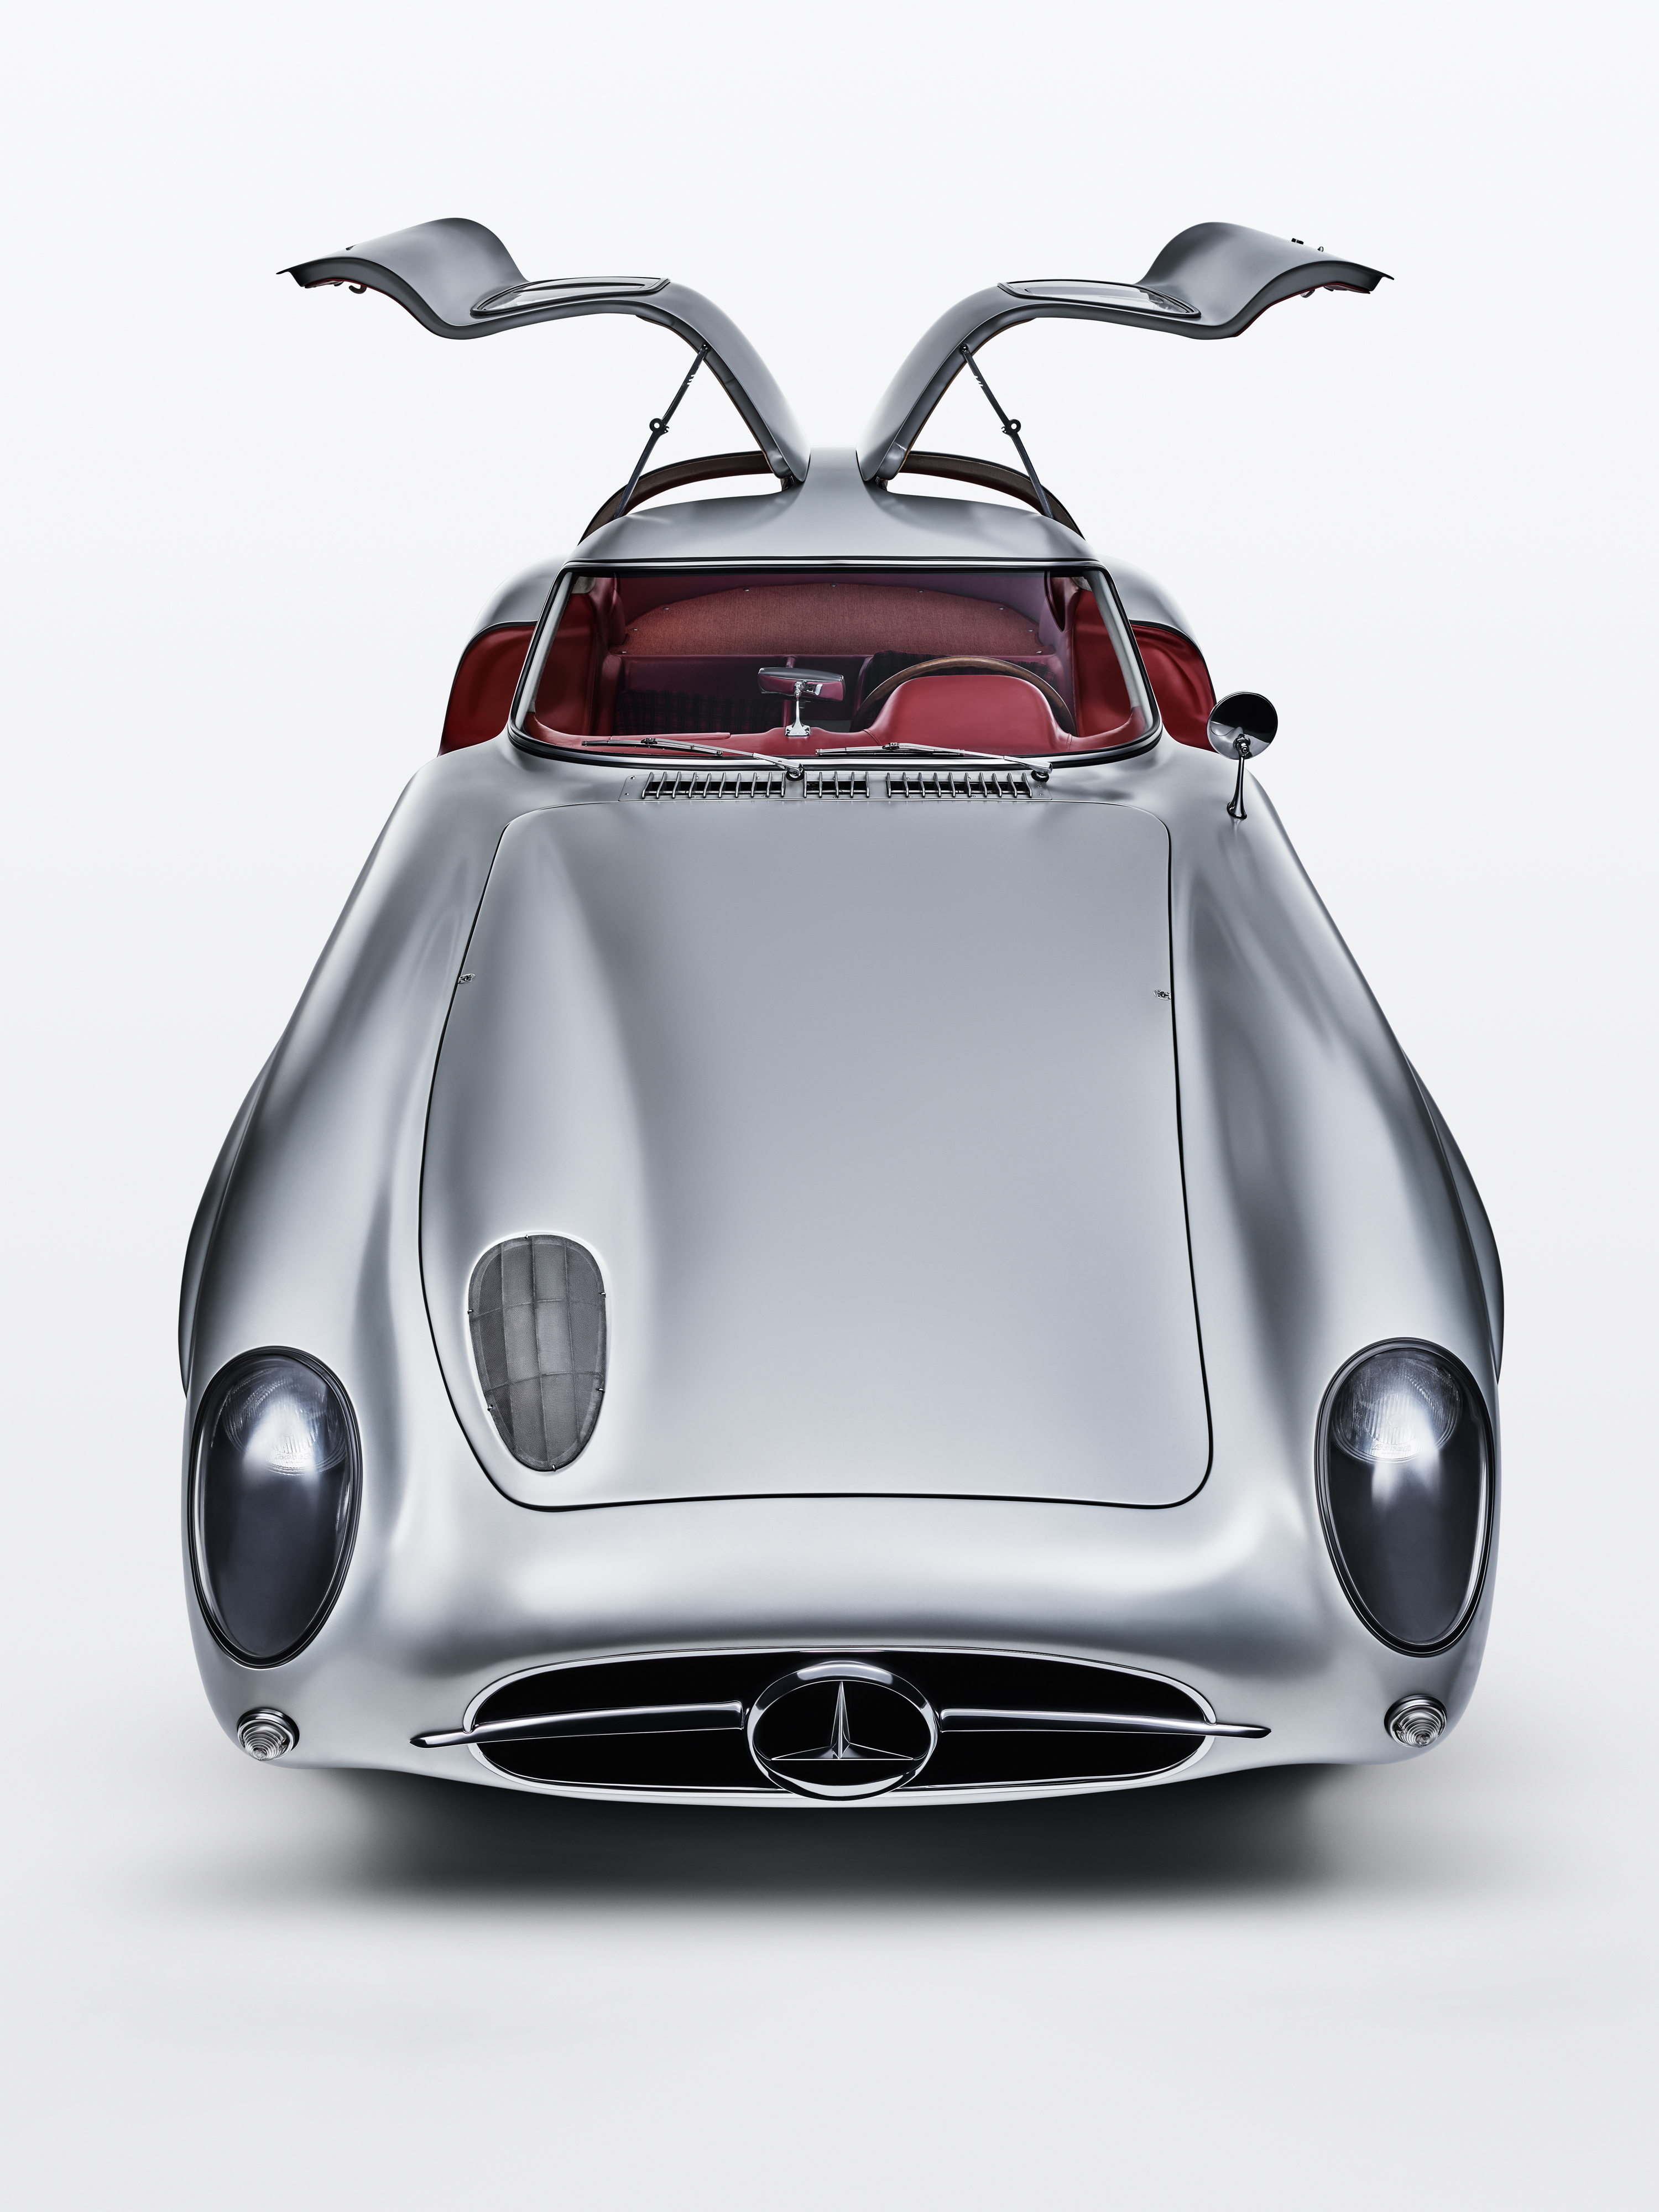 Mercedes Benz 300 SLR Uhlenhaut Coupé Is World's Most Expensive Car After Selling For $142.9 Million